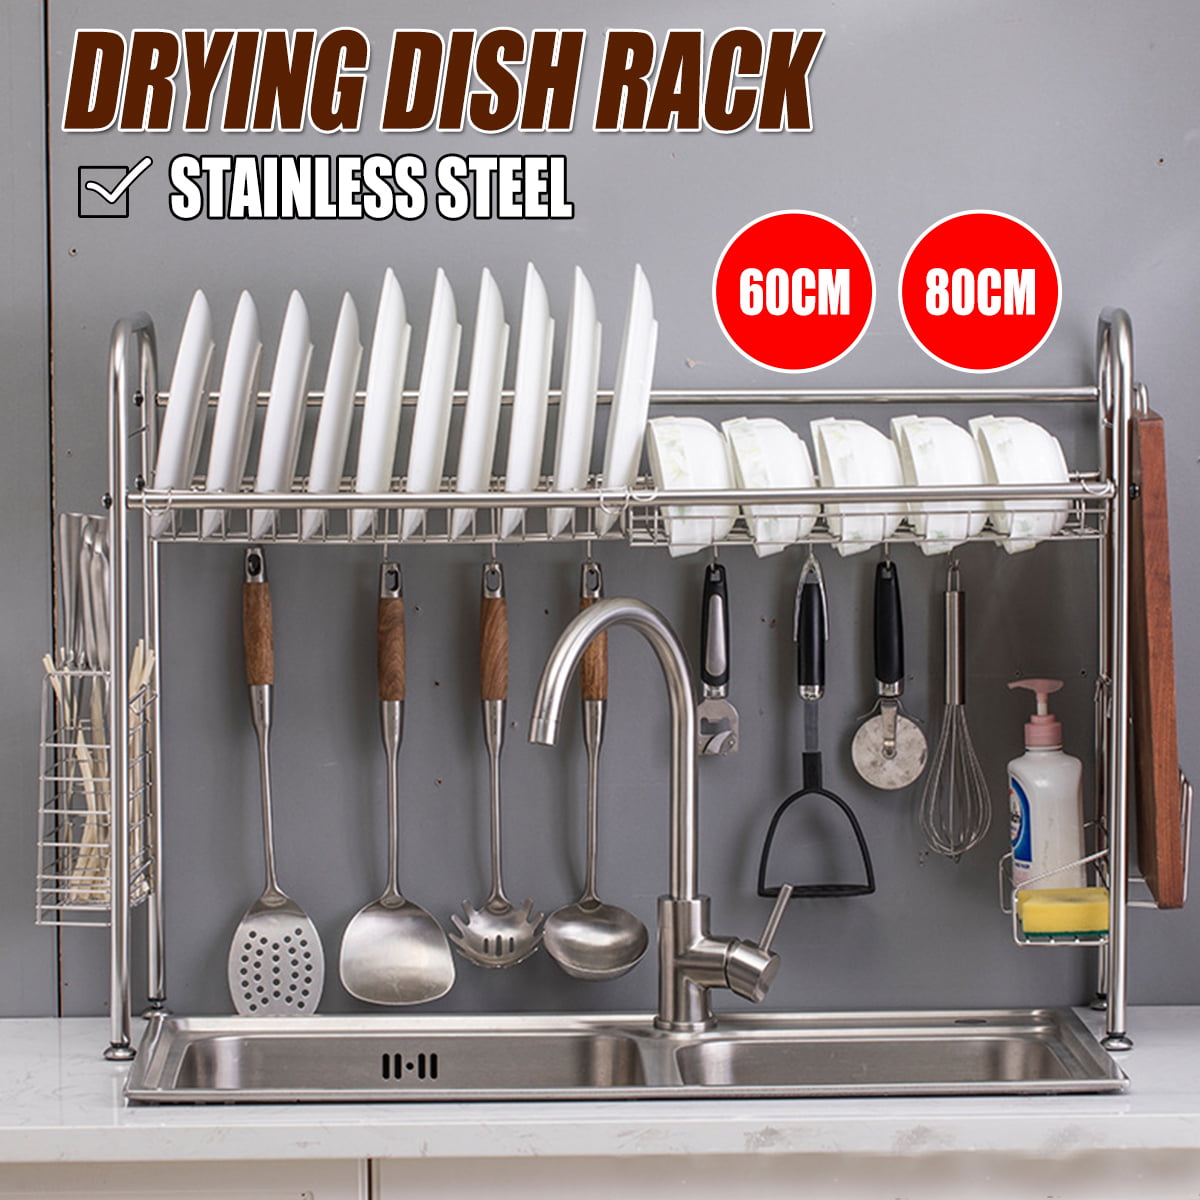 Details about   Over Sink Dish Drying Rack Cup Drainer Kitchen Stainless Steel Shelf Holder US 